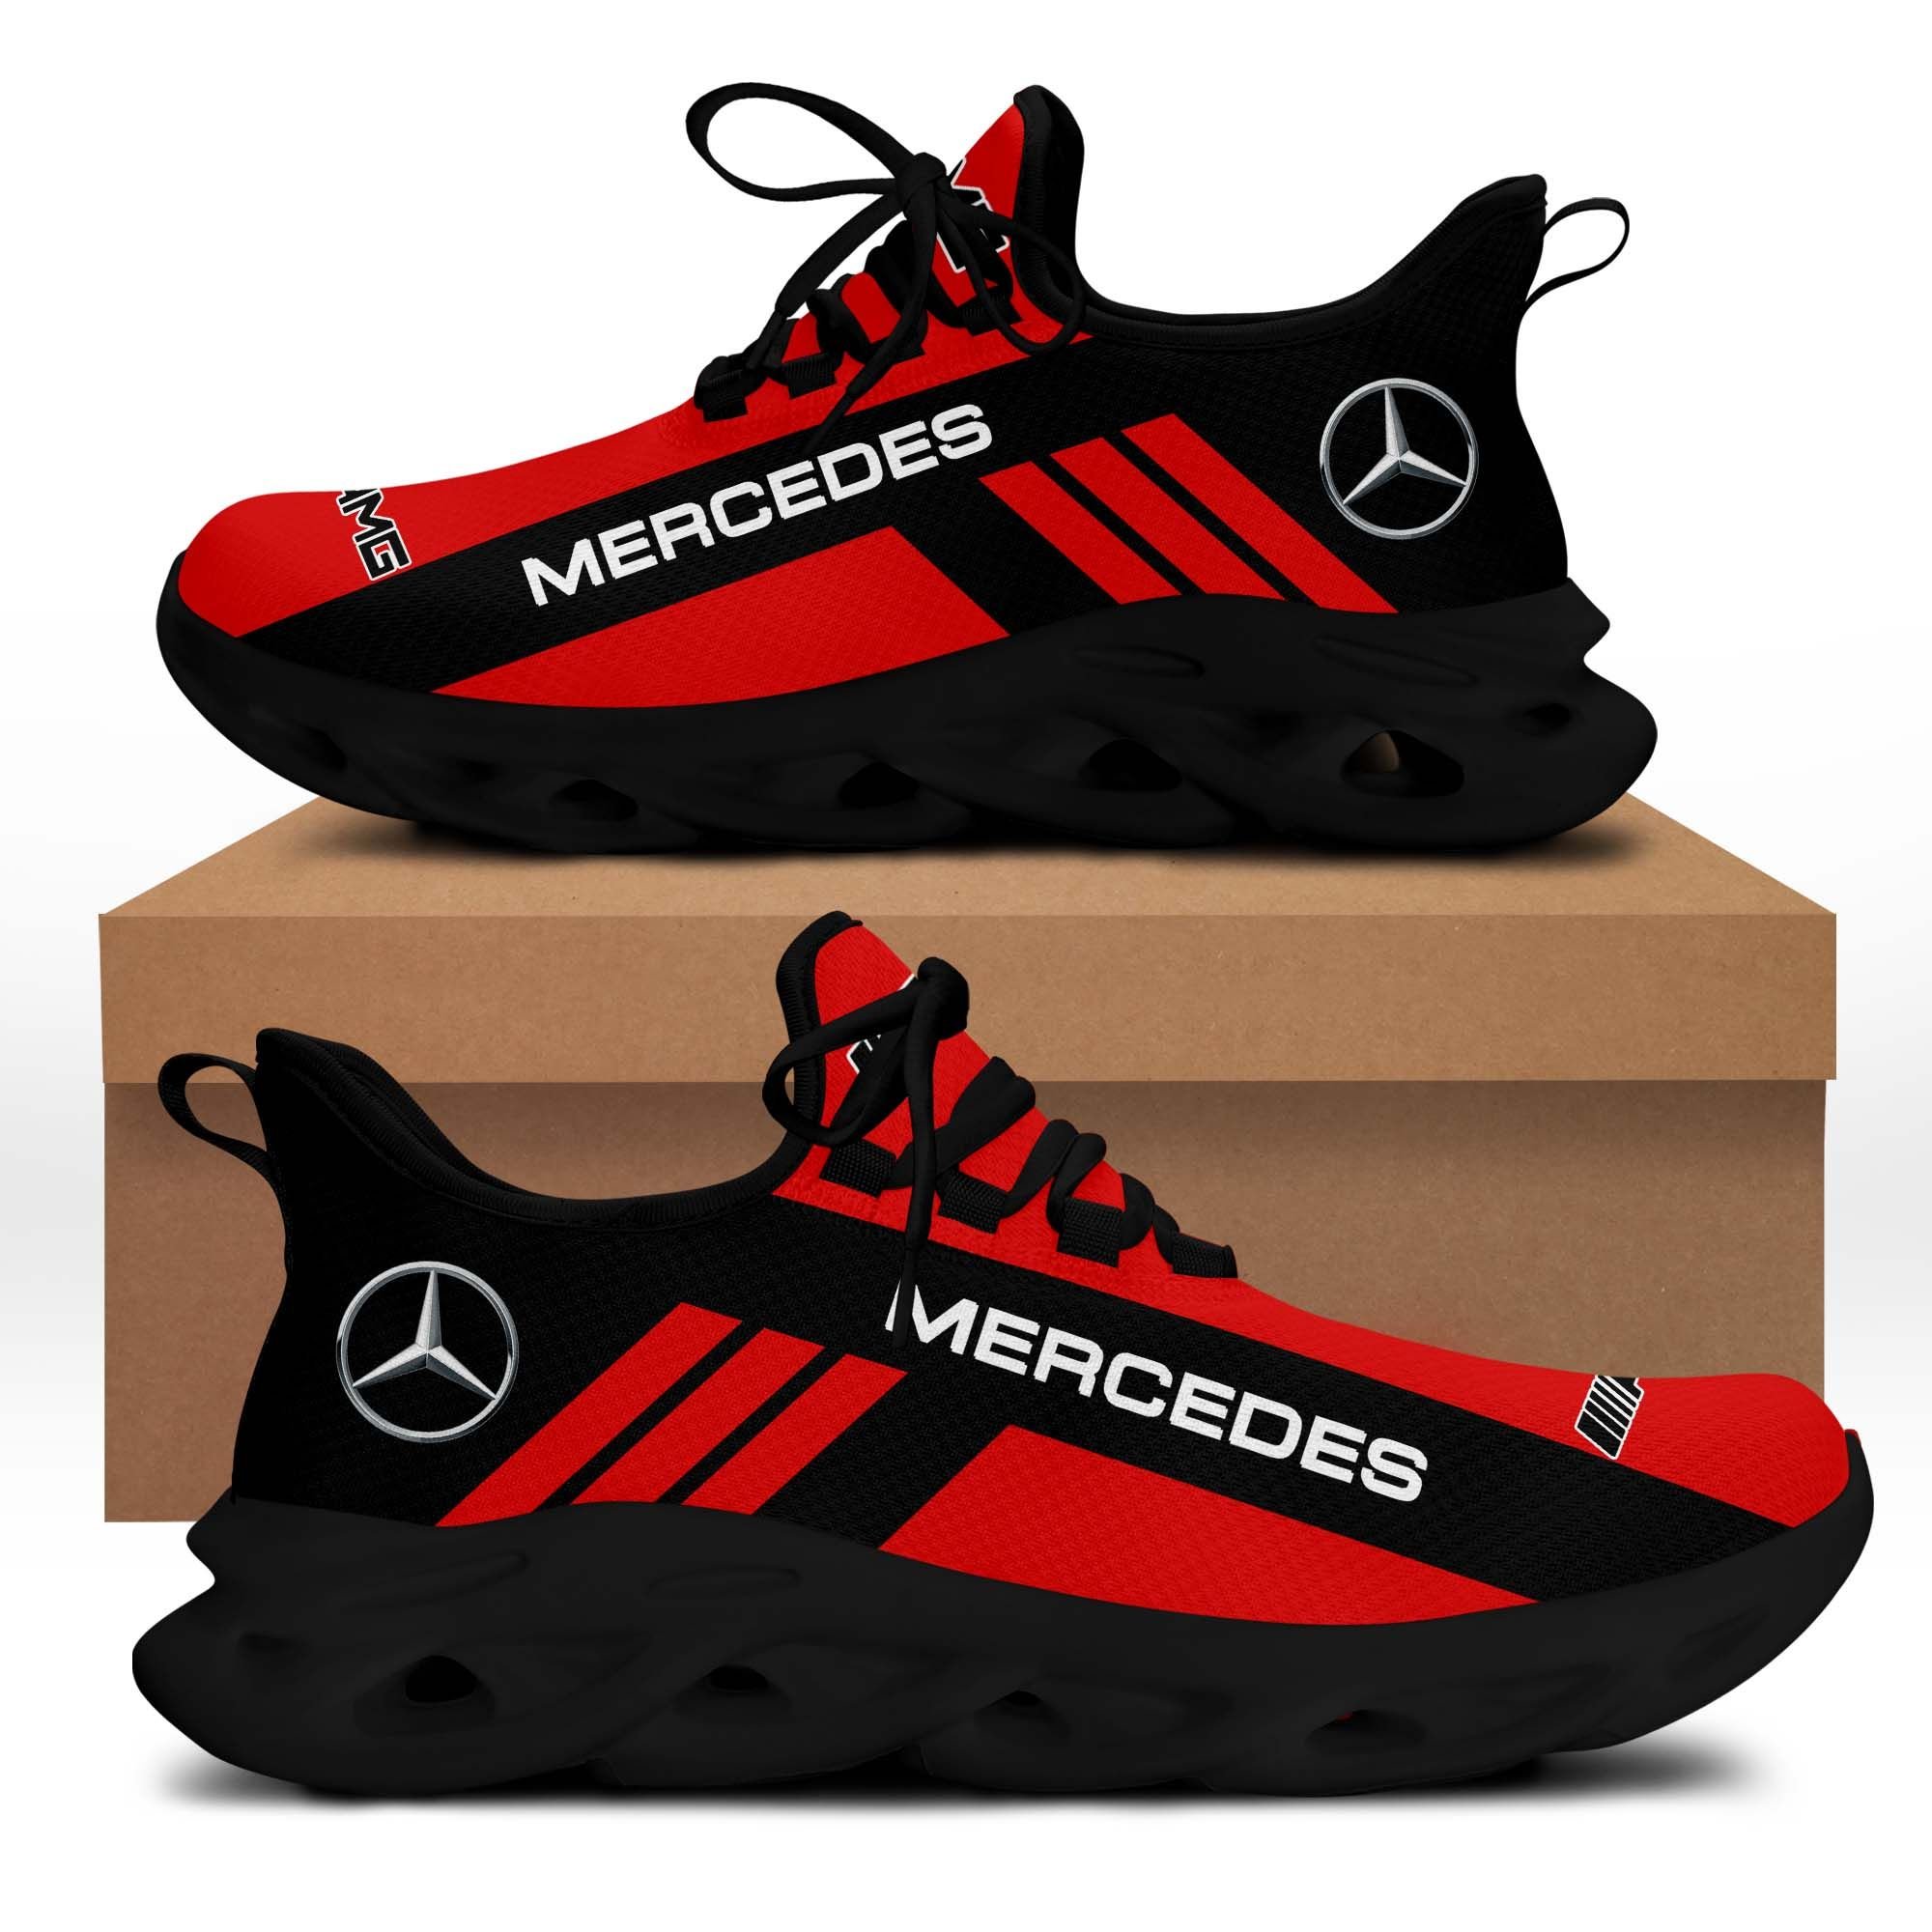 Mcd Amg Running Shoes Ver 1 (Red)